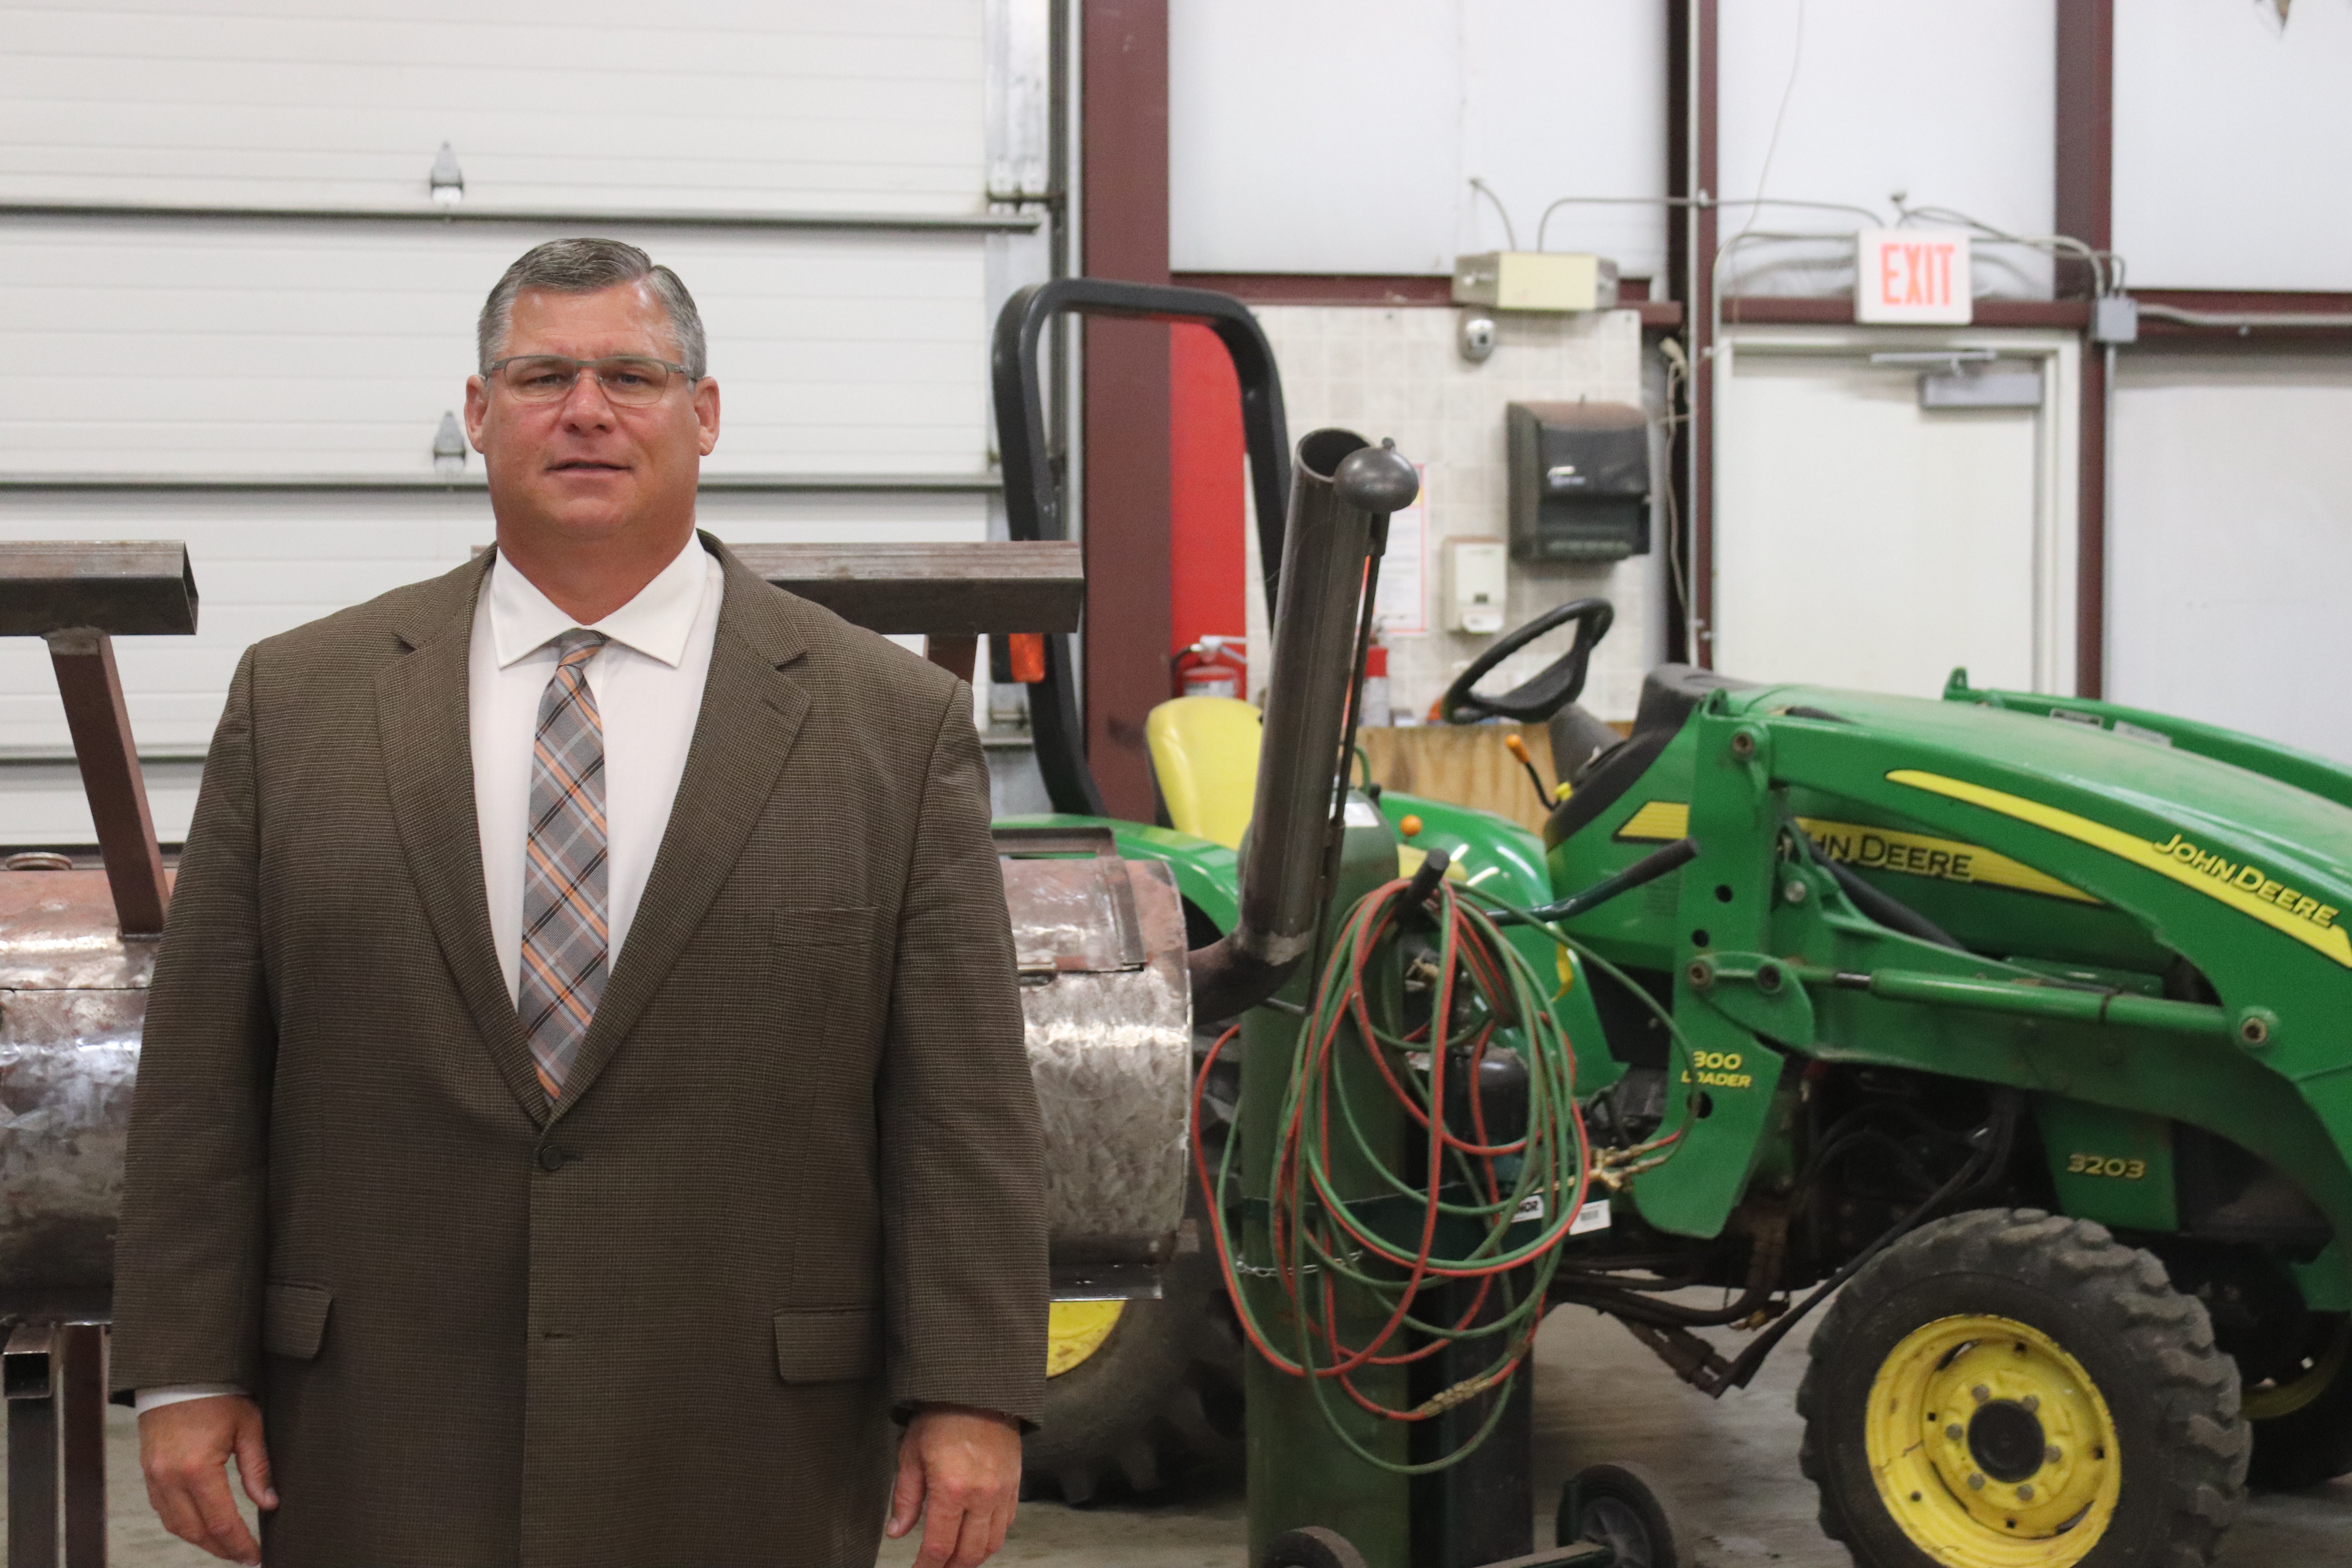 Calumet Public Schools Superintendent Keith Weldon stands in a  garage, that he recently turned into space for an agriculture program. Weldon worries if lawmakers take some of his local funding, he would have to scale back the popular program.  